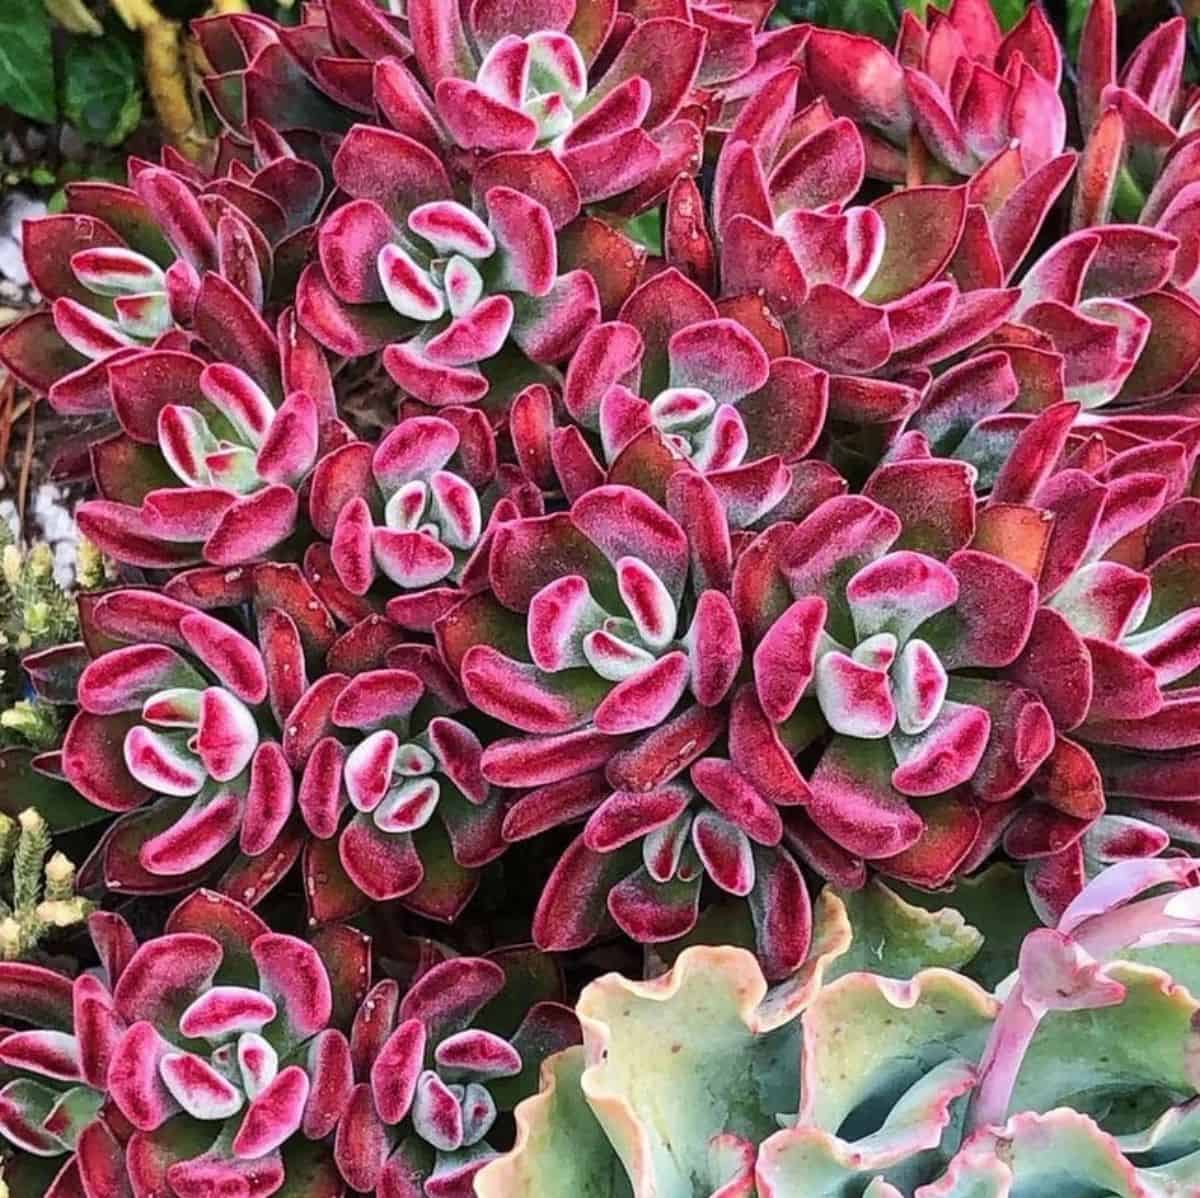 Echeveria pulvinata var. Ruby with beautiful red foliage.